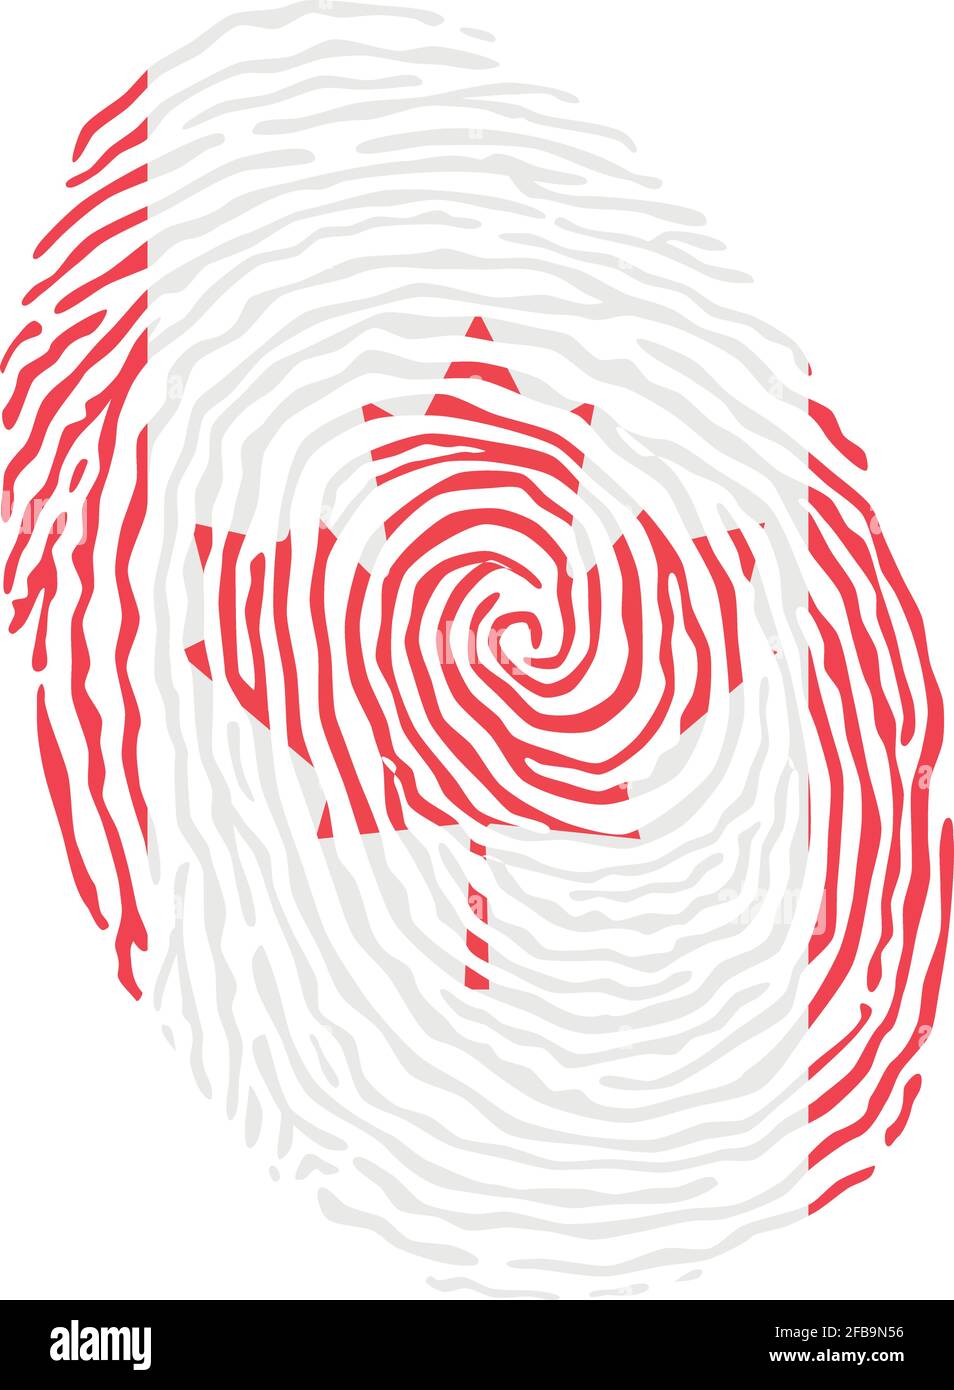 Fingerprint vector colored with the national flag of Canada Stock Vector